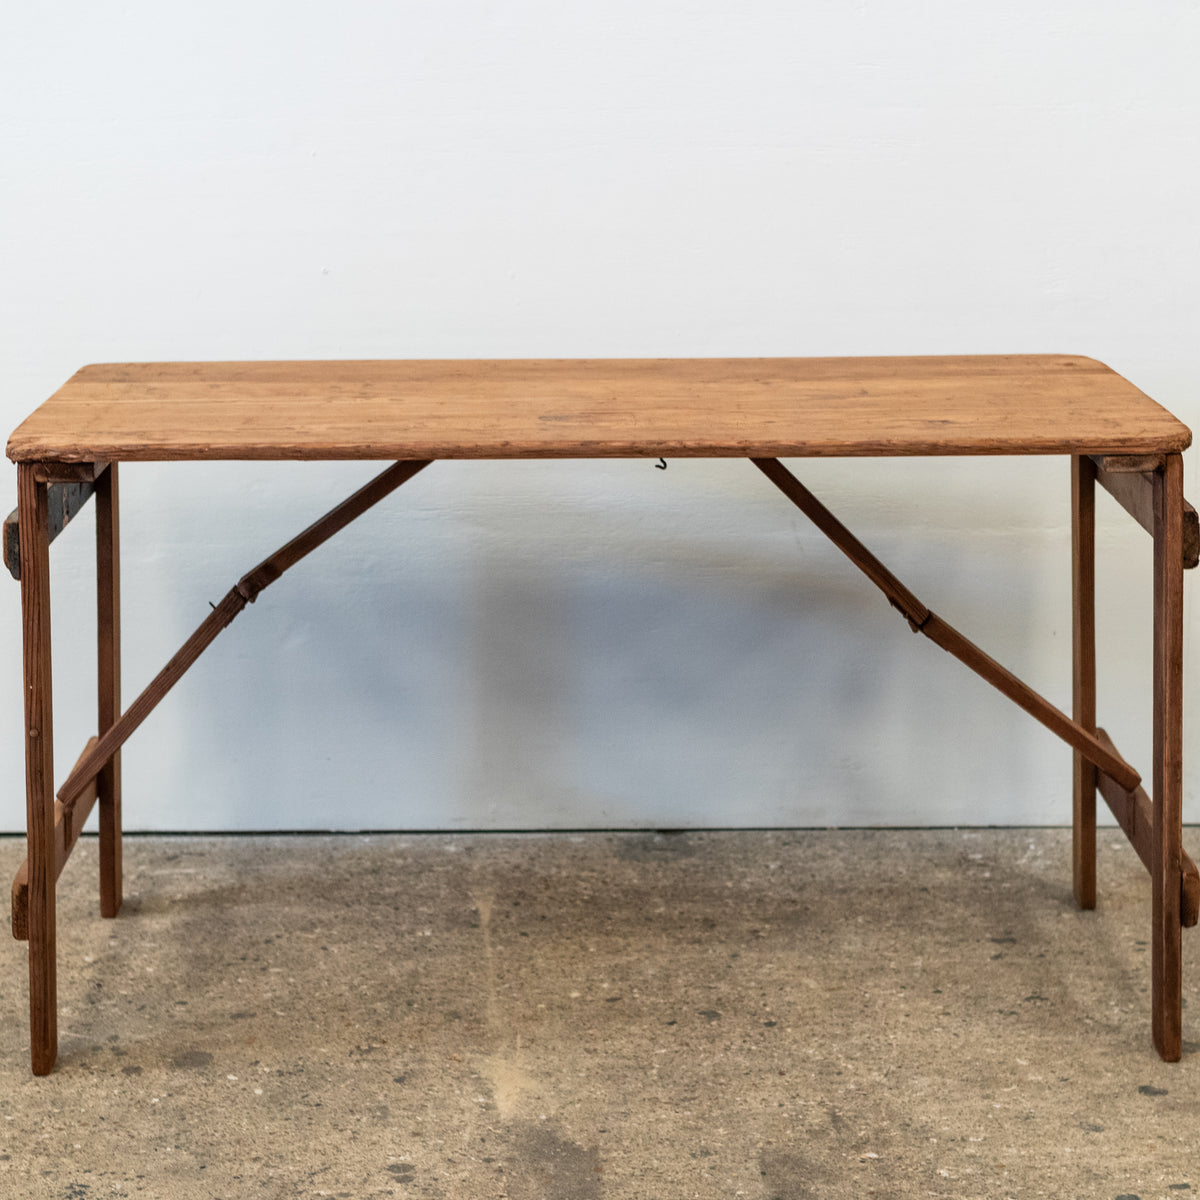 Reclaimed Mid-Century Pine Trestle Tables | The Architectural Forum